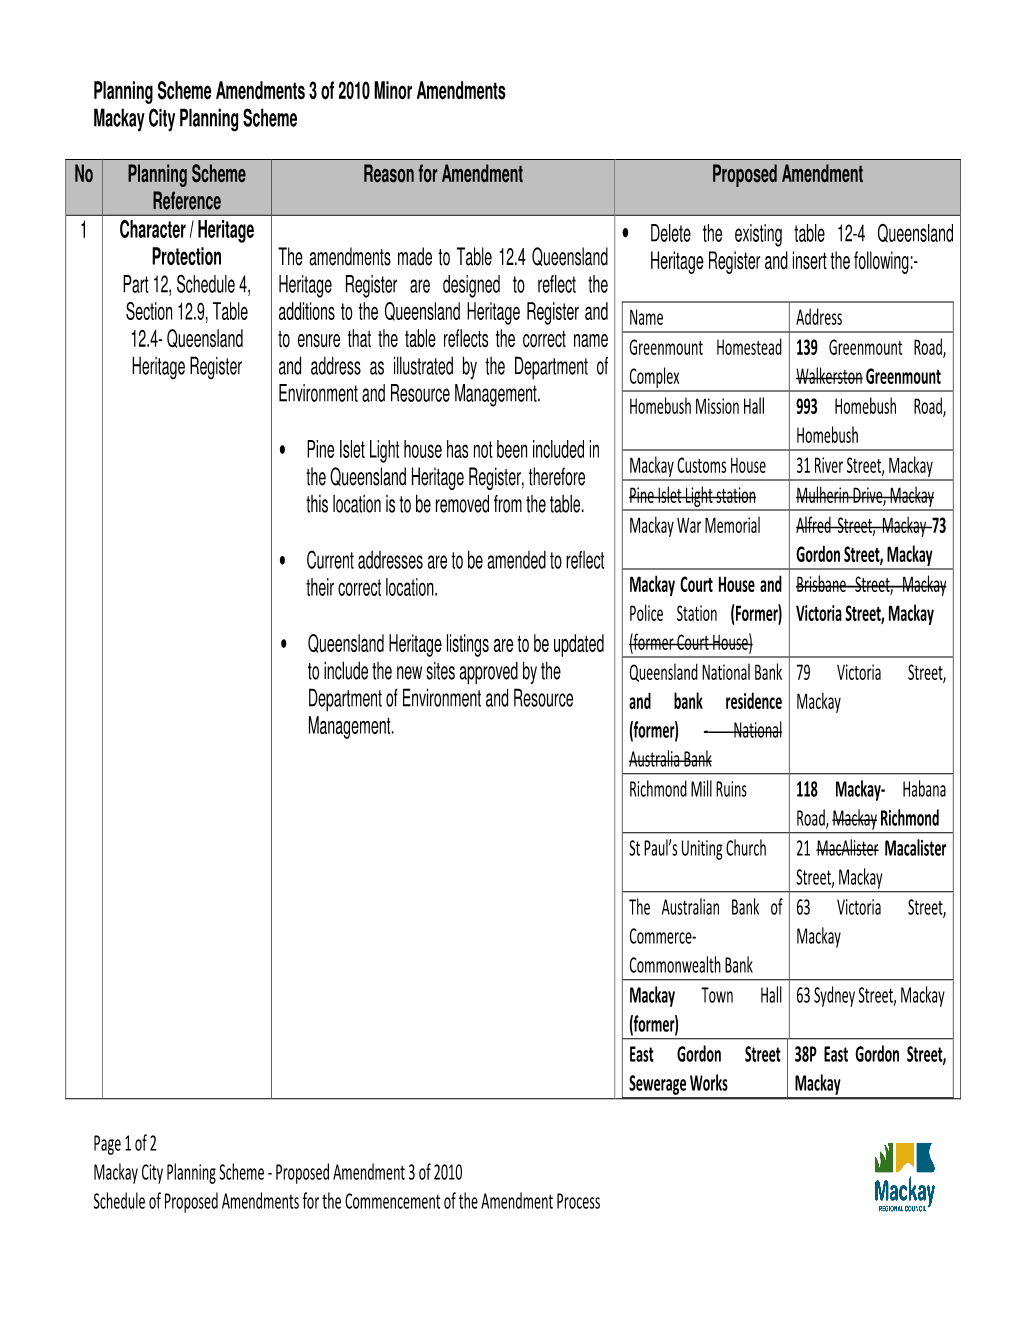 Of 2 Mackay City Planning Scheme - Proposed Amendment 3 of 2010 Schedule of Proposed Amendments for the Commencement of the Amendment Process